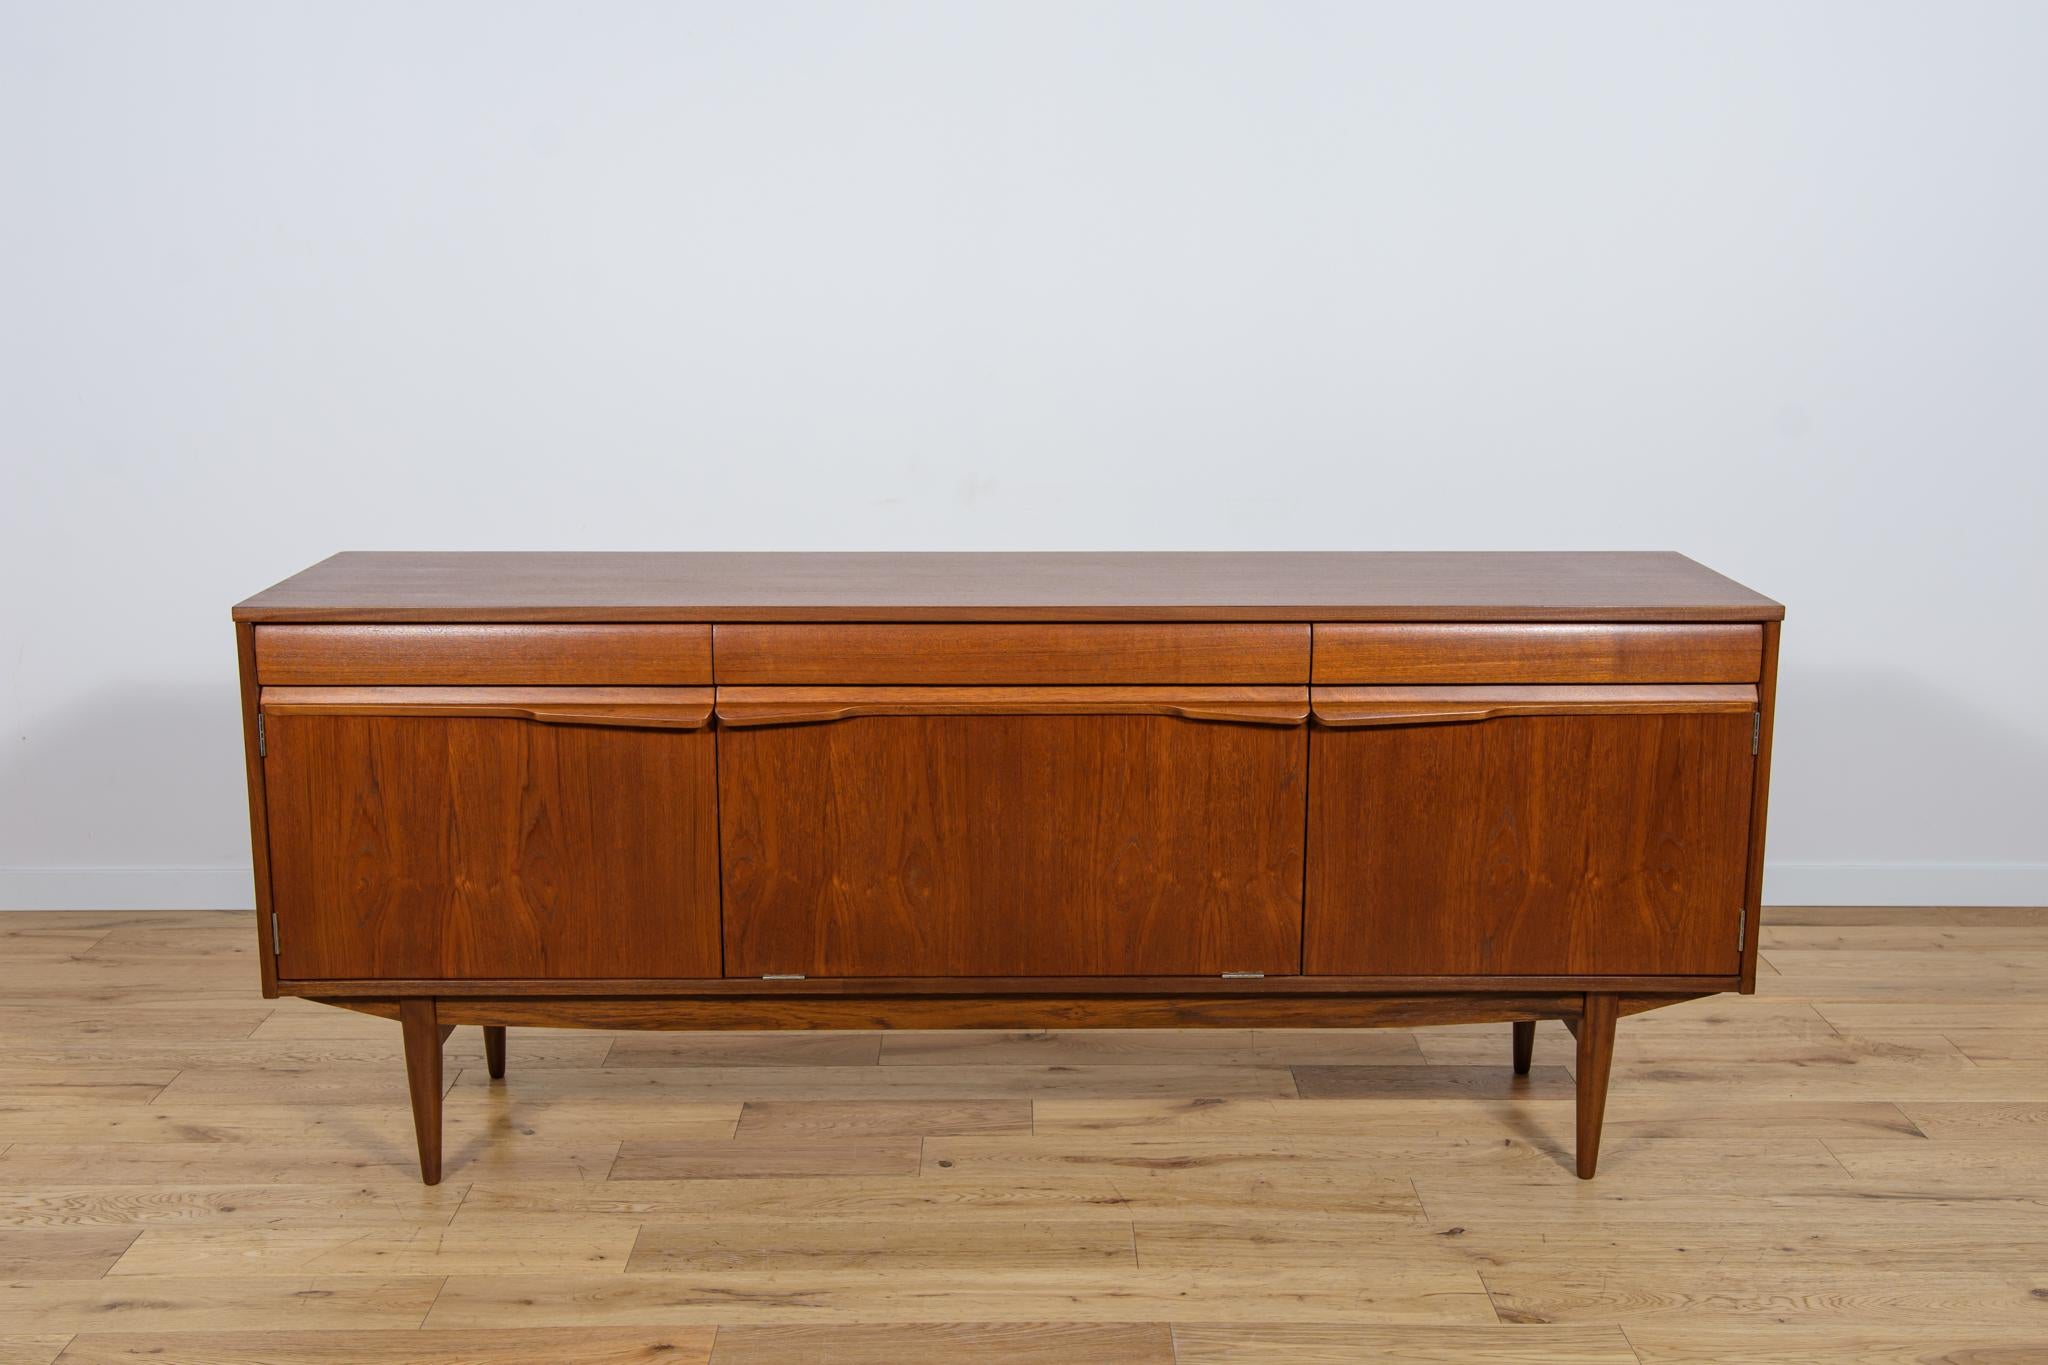 The  teak sideboard was produced in Great Britain in the 1960s.The sideboard is a flagship example of the high level of British design of the mid-20th century, as evidenced by the shape of rounded drawers and handles, perfectly integrated into the